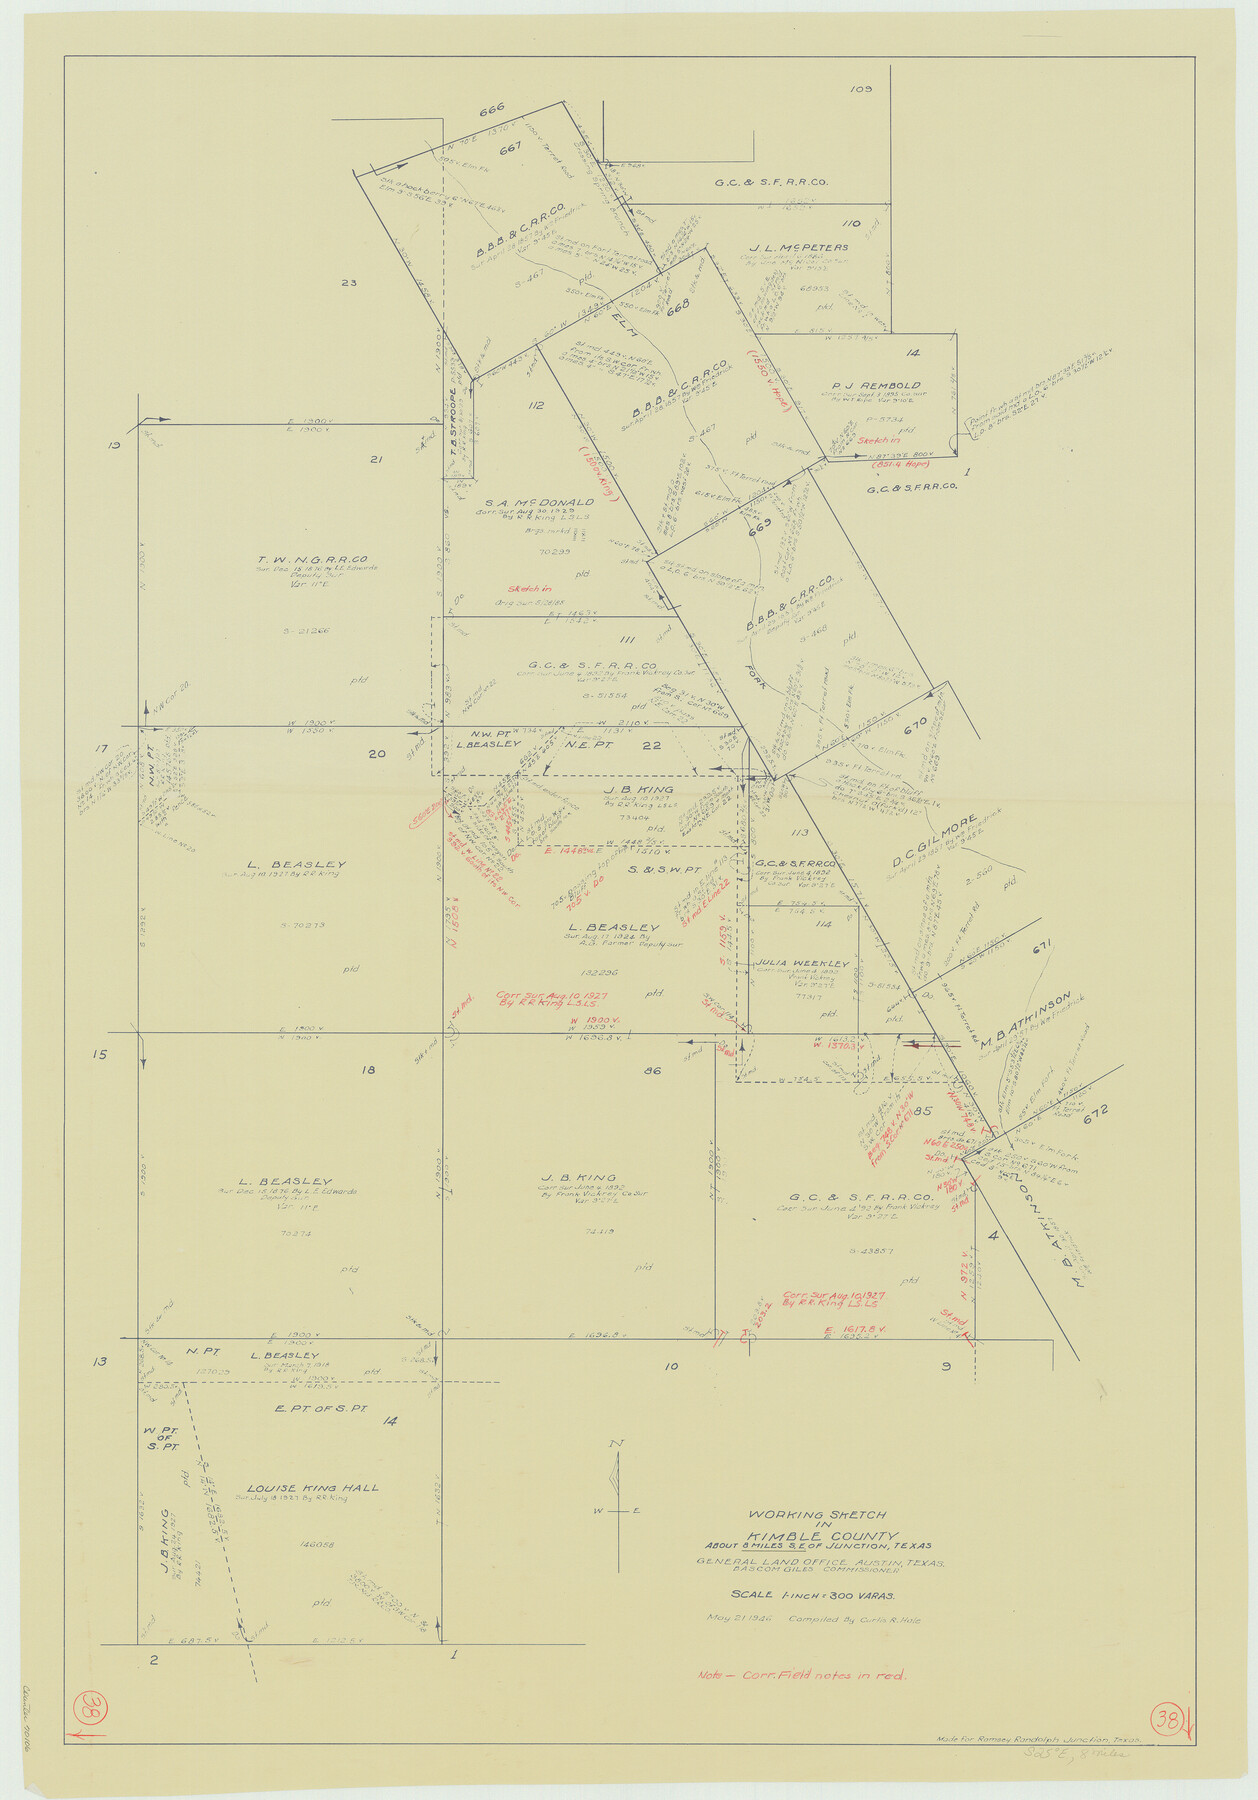 70106, Kimble County Working Sketch 38, General Map Collection